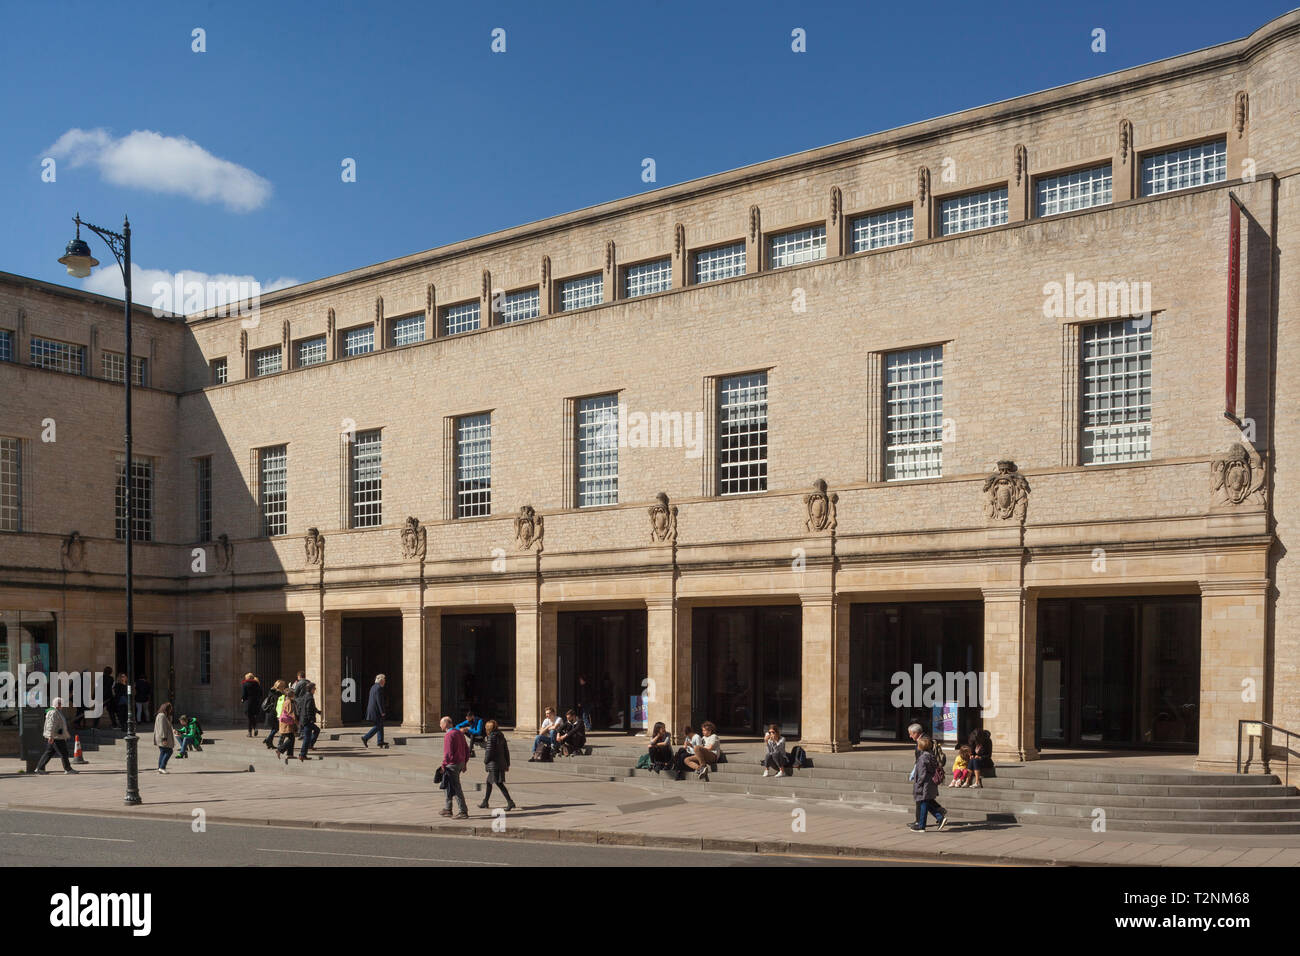 The Weston library in Broad Street, Oxford Stock Photo